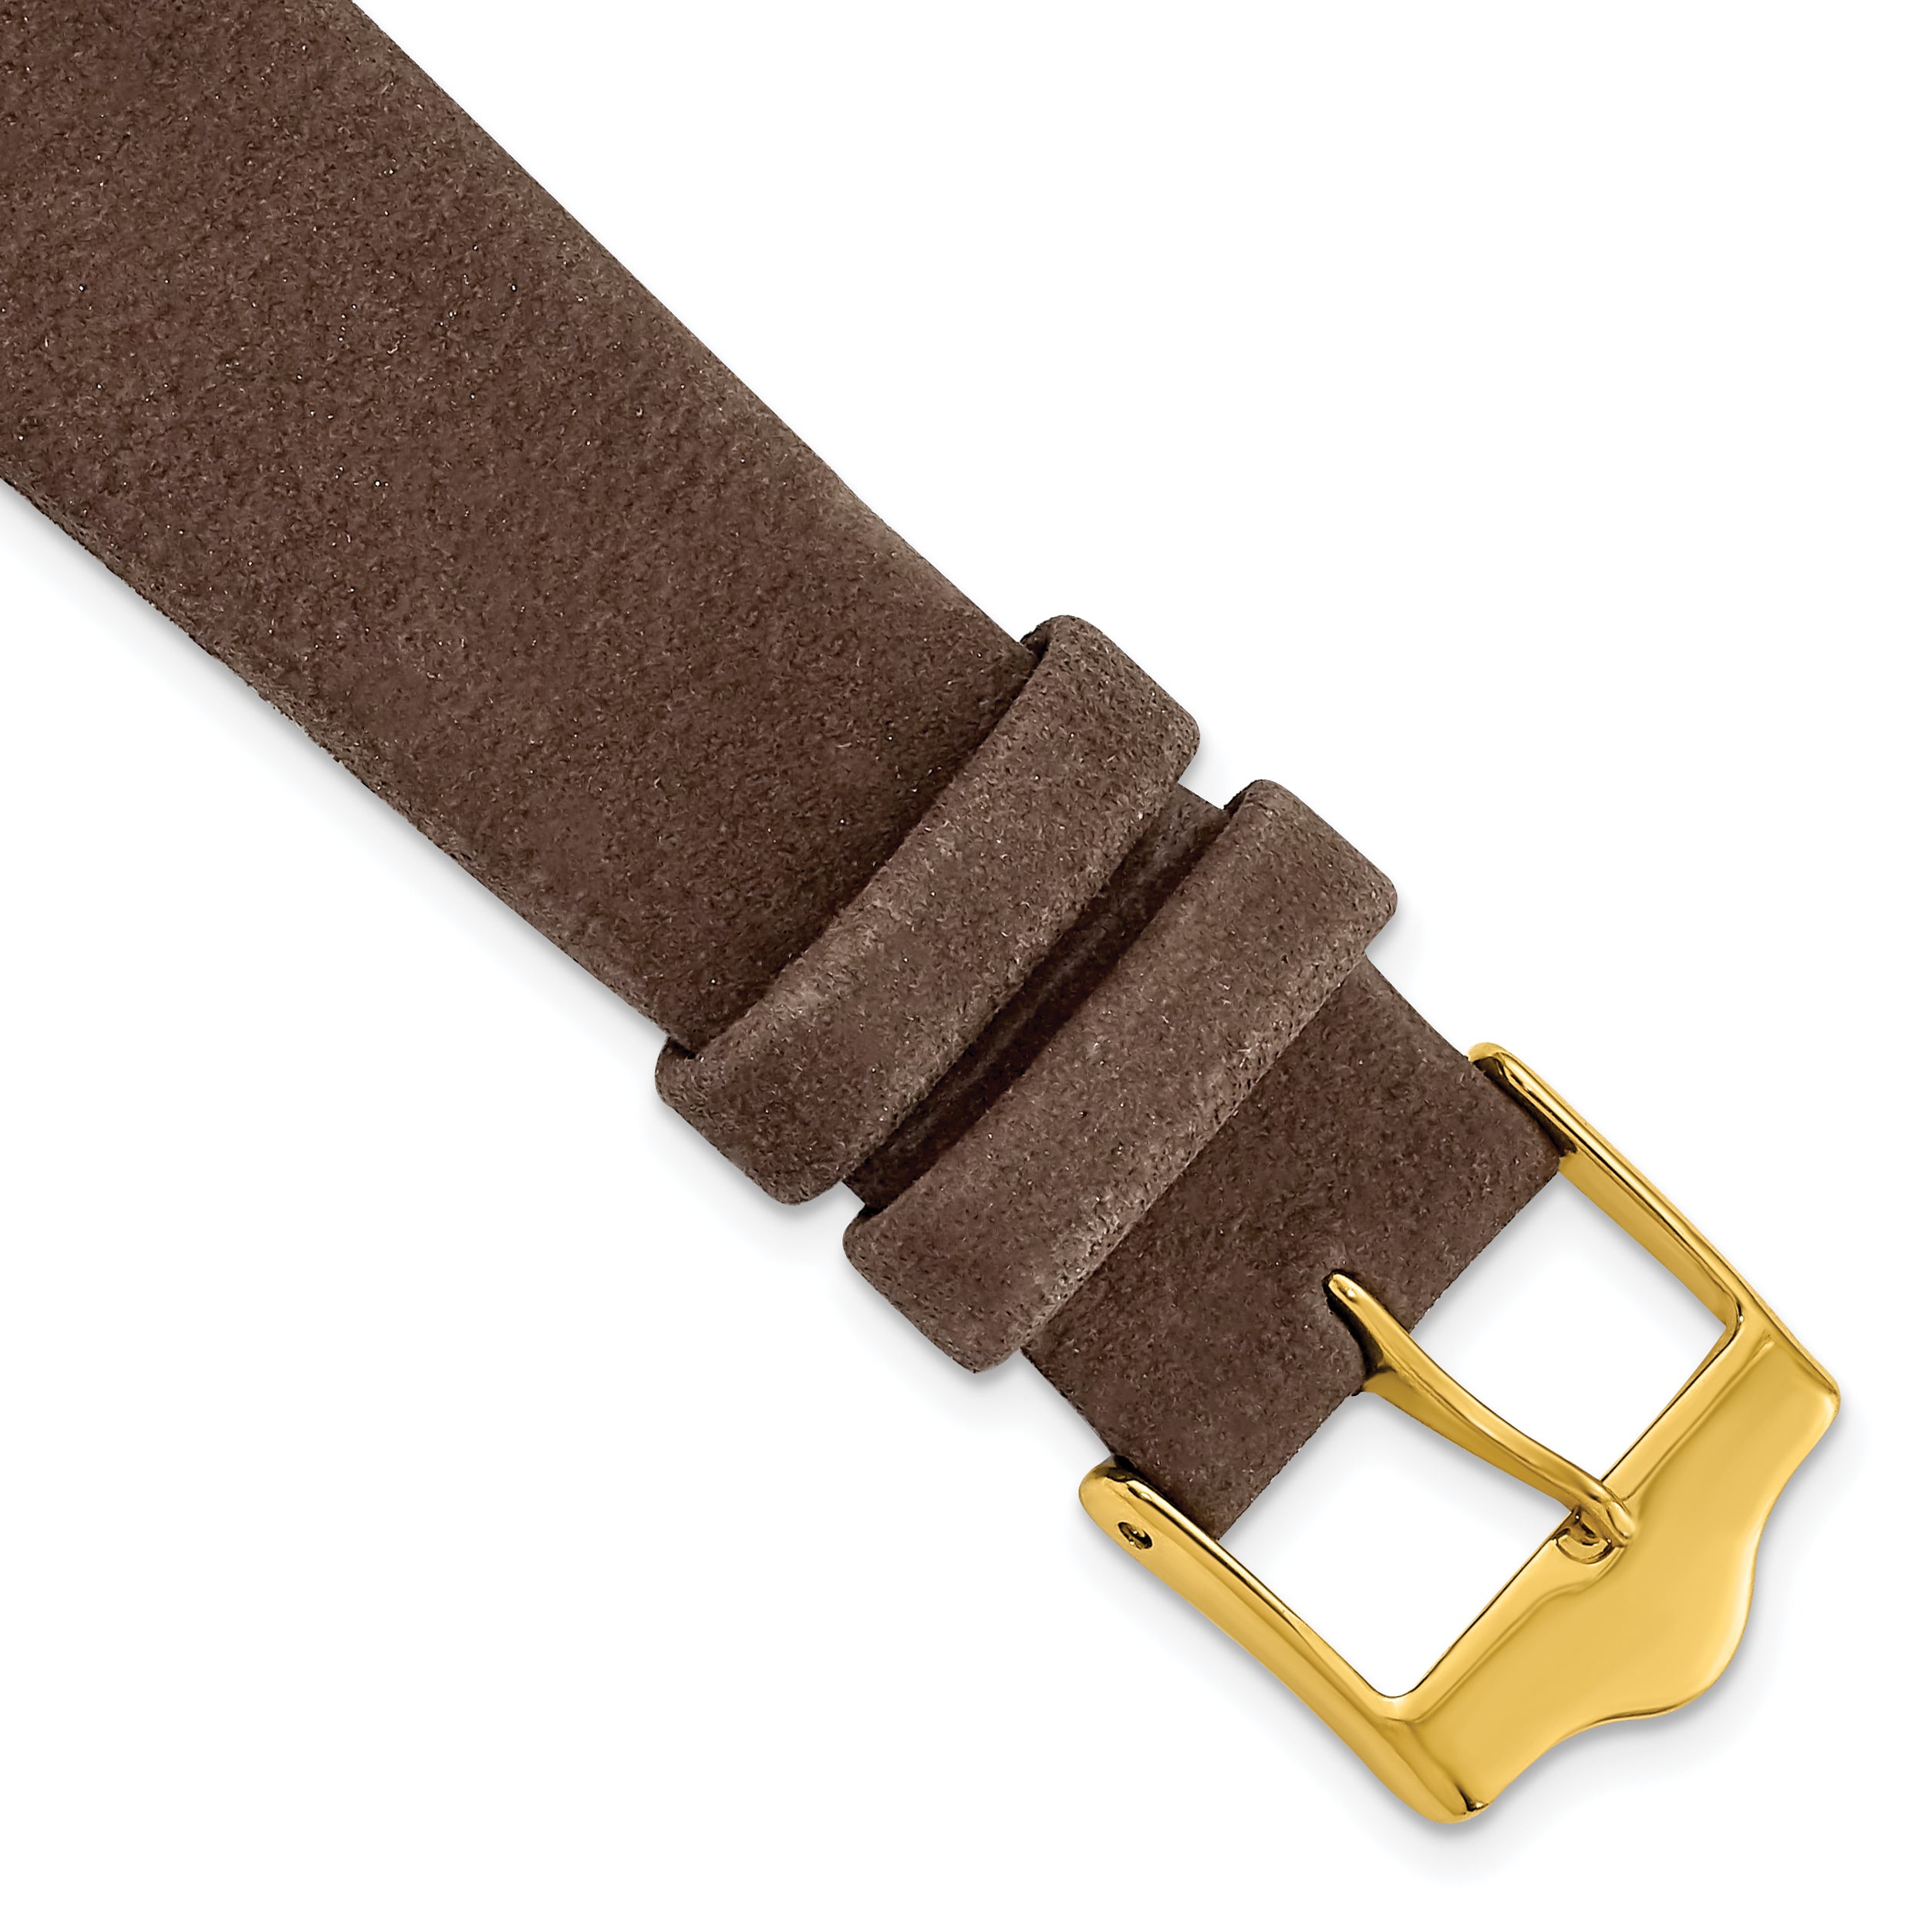 DeBeer 19mm Dark Brown Suede Flat Leather with Gold-tone Buckle 7.75 inch Watch Band